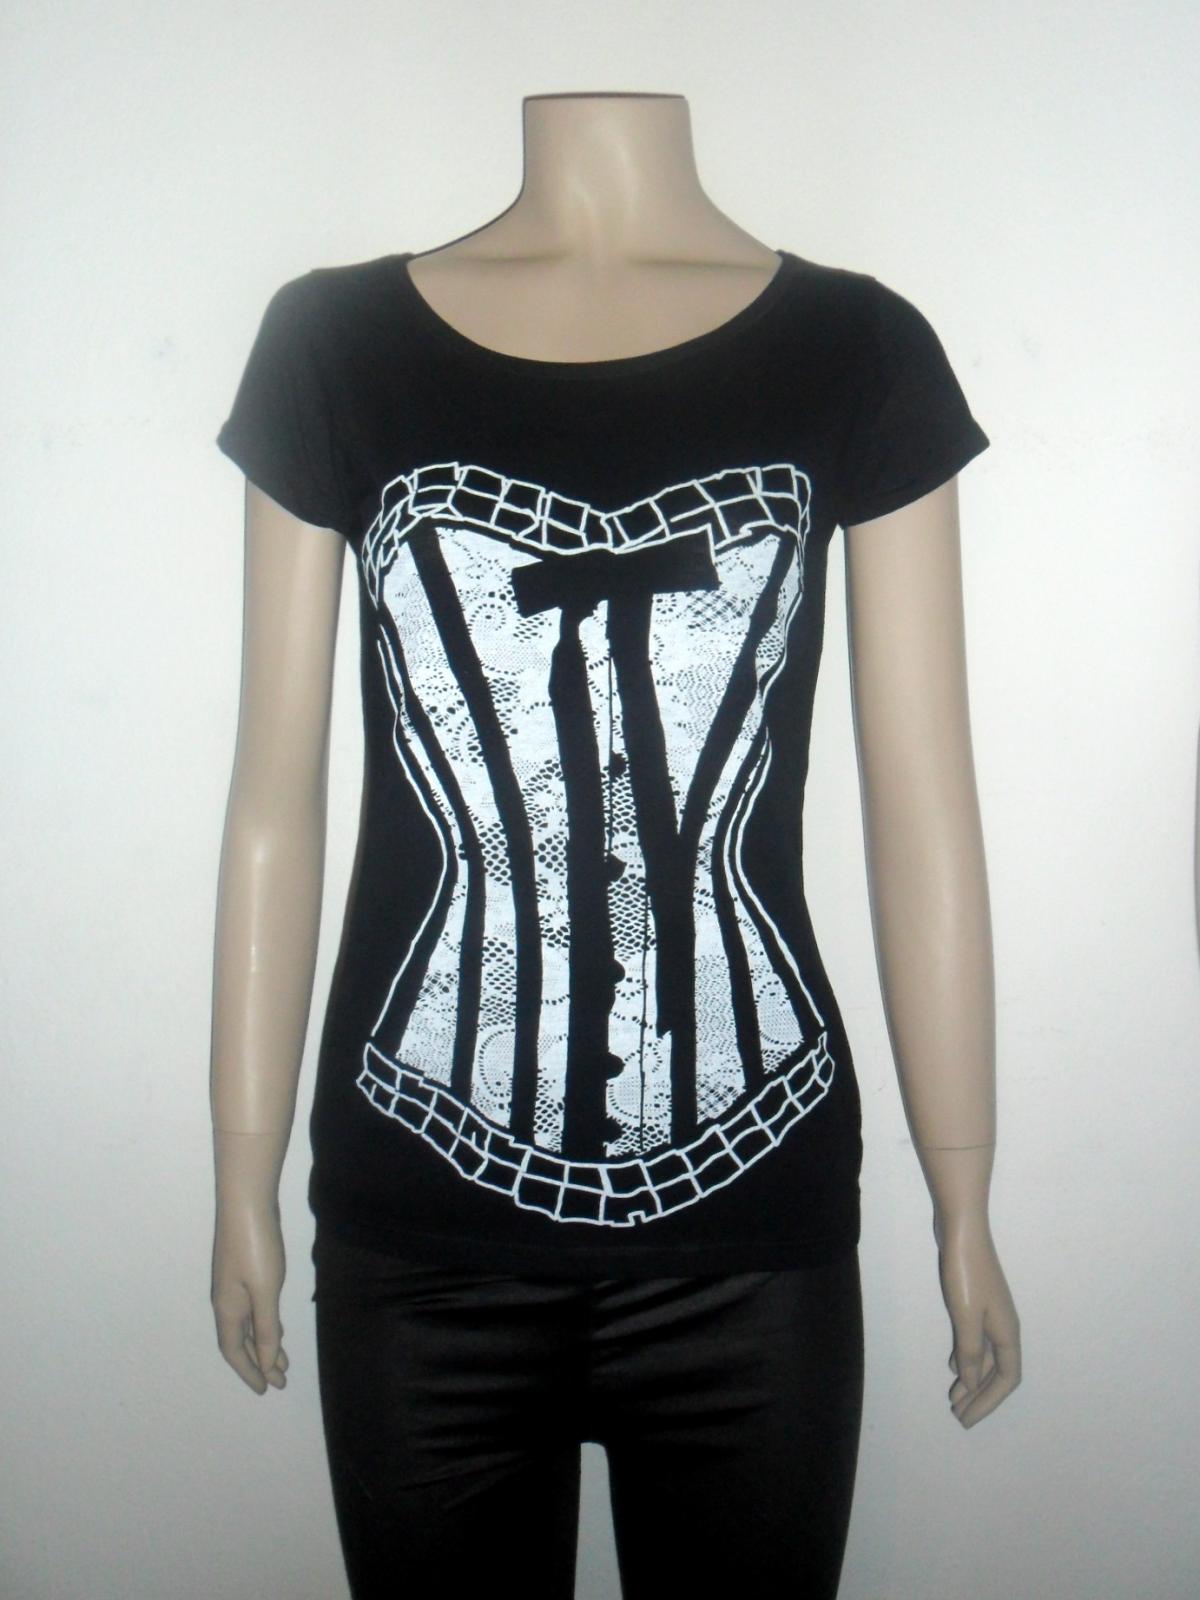 Black And Withe Lace Corset Tshirt For Women Scoop Neck Tee